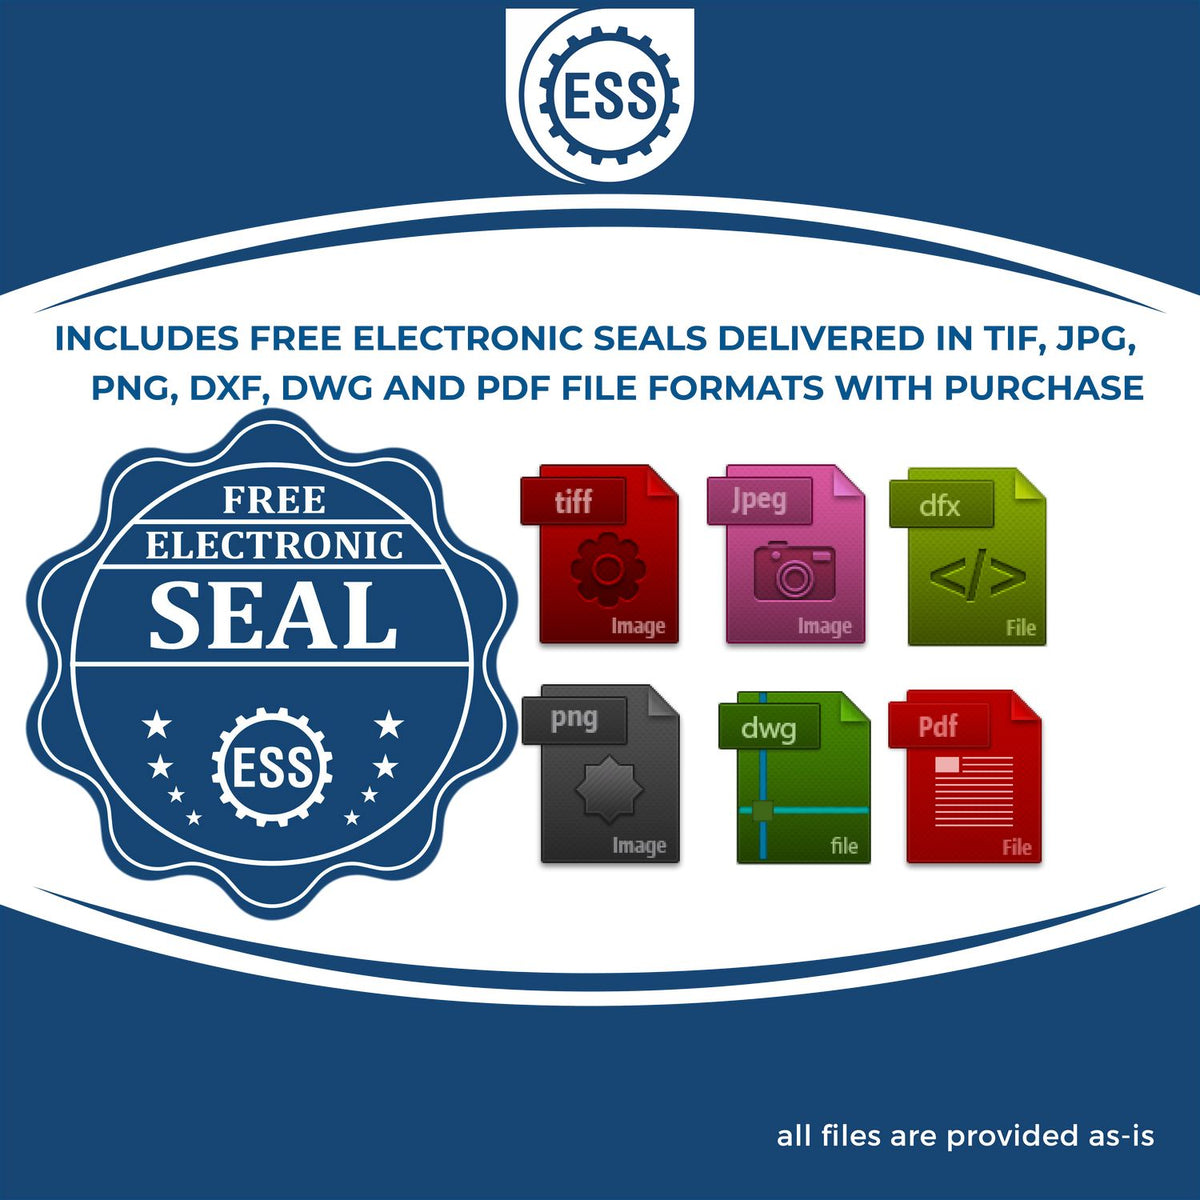 An infographic for the free electronic seal for the MaxLight Premium Pre-Inked Minnesota State Seal Notarial Stamp illustrating the different file type icons such as DXF, DWG, TIF, JPG and PNG.